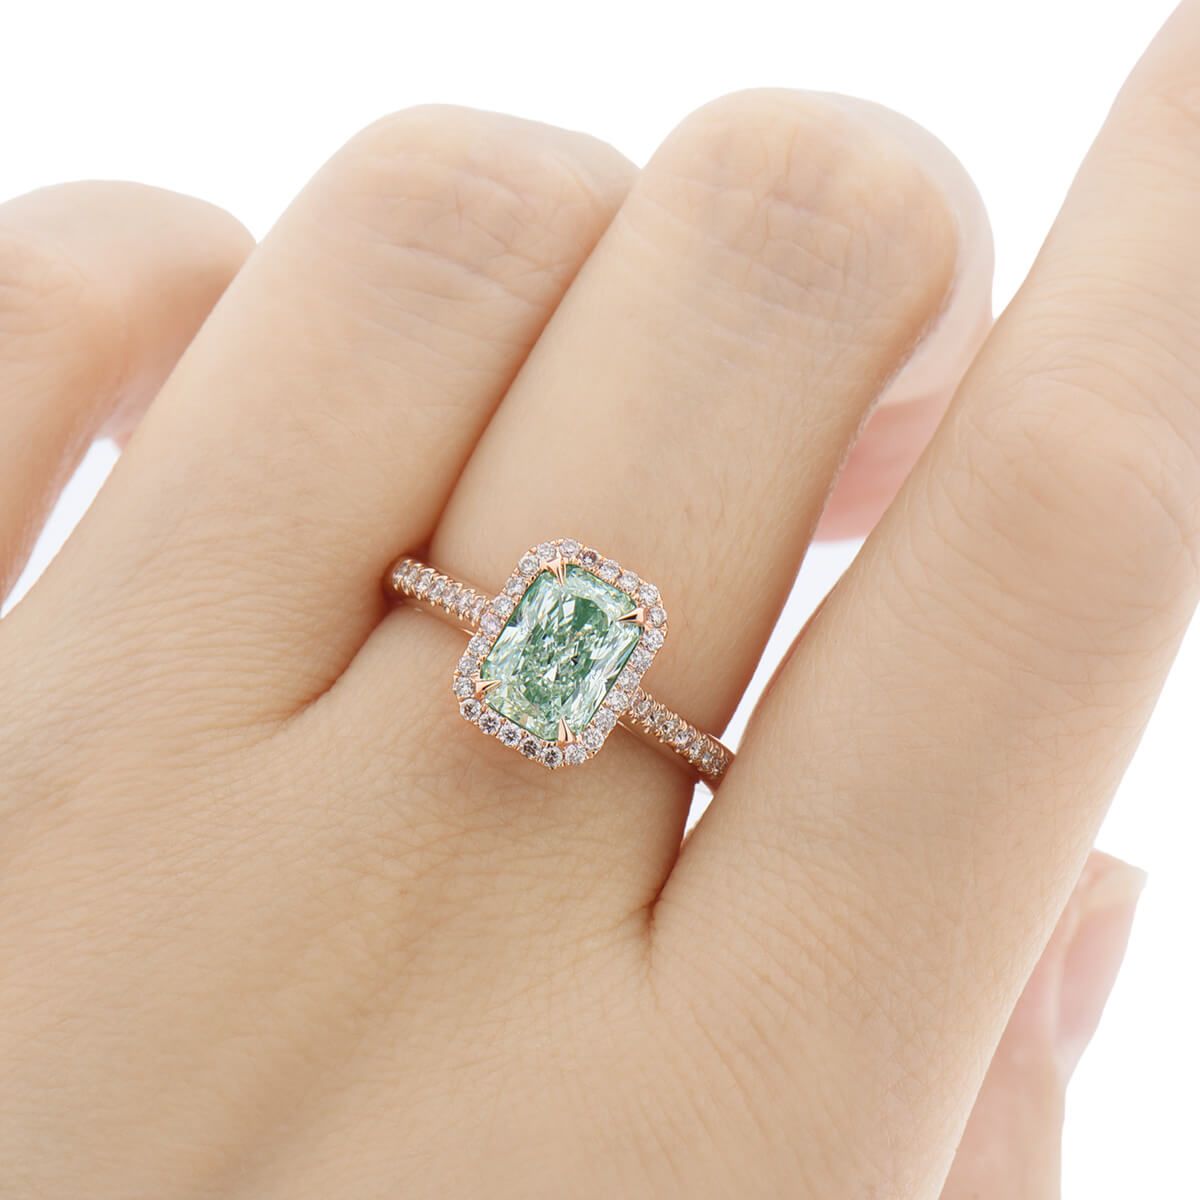 Faint green Diamond Ring 1.98ct.tw, Radiant Shape, GIA certified 6271313281